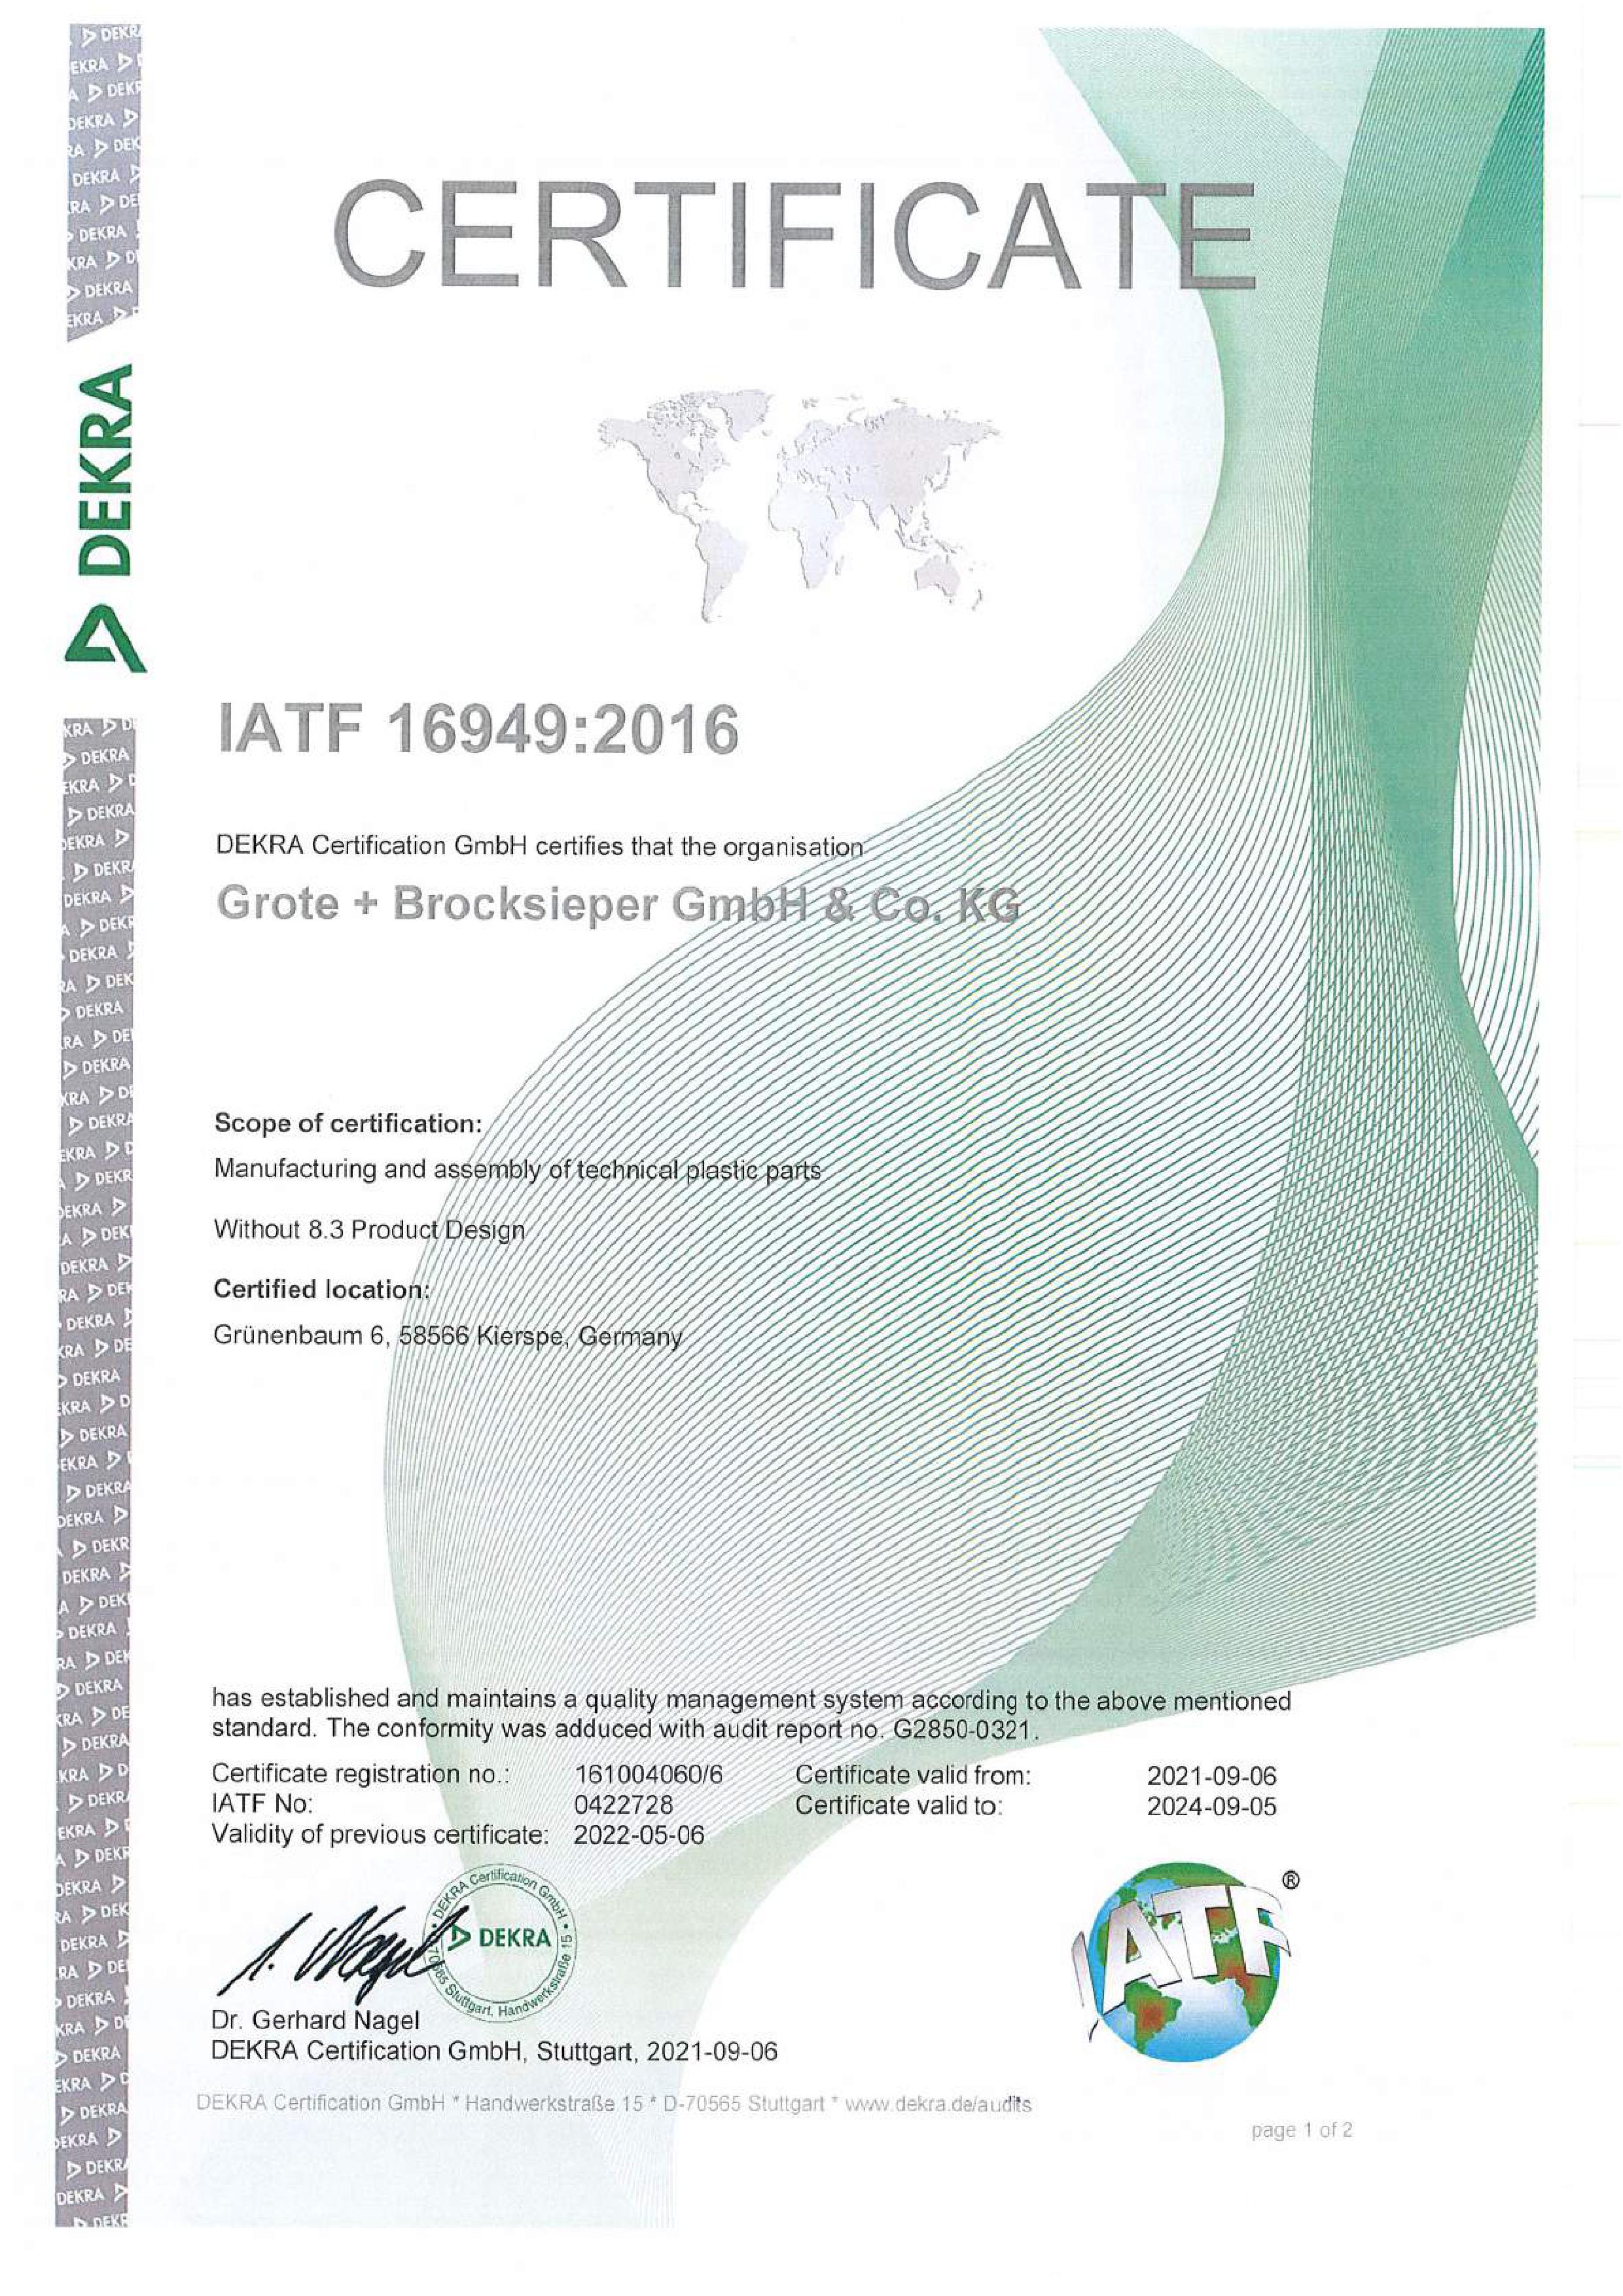 Certificate IATF - Click to download